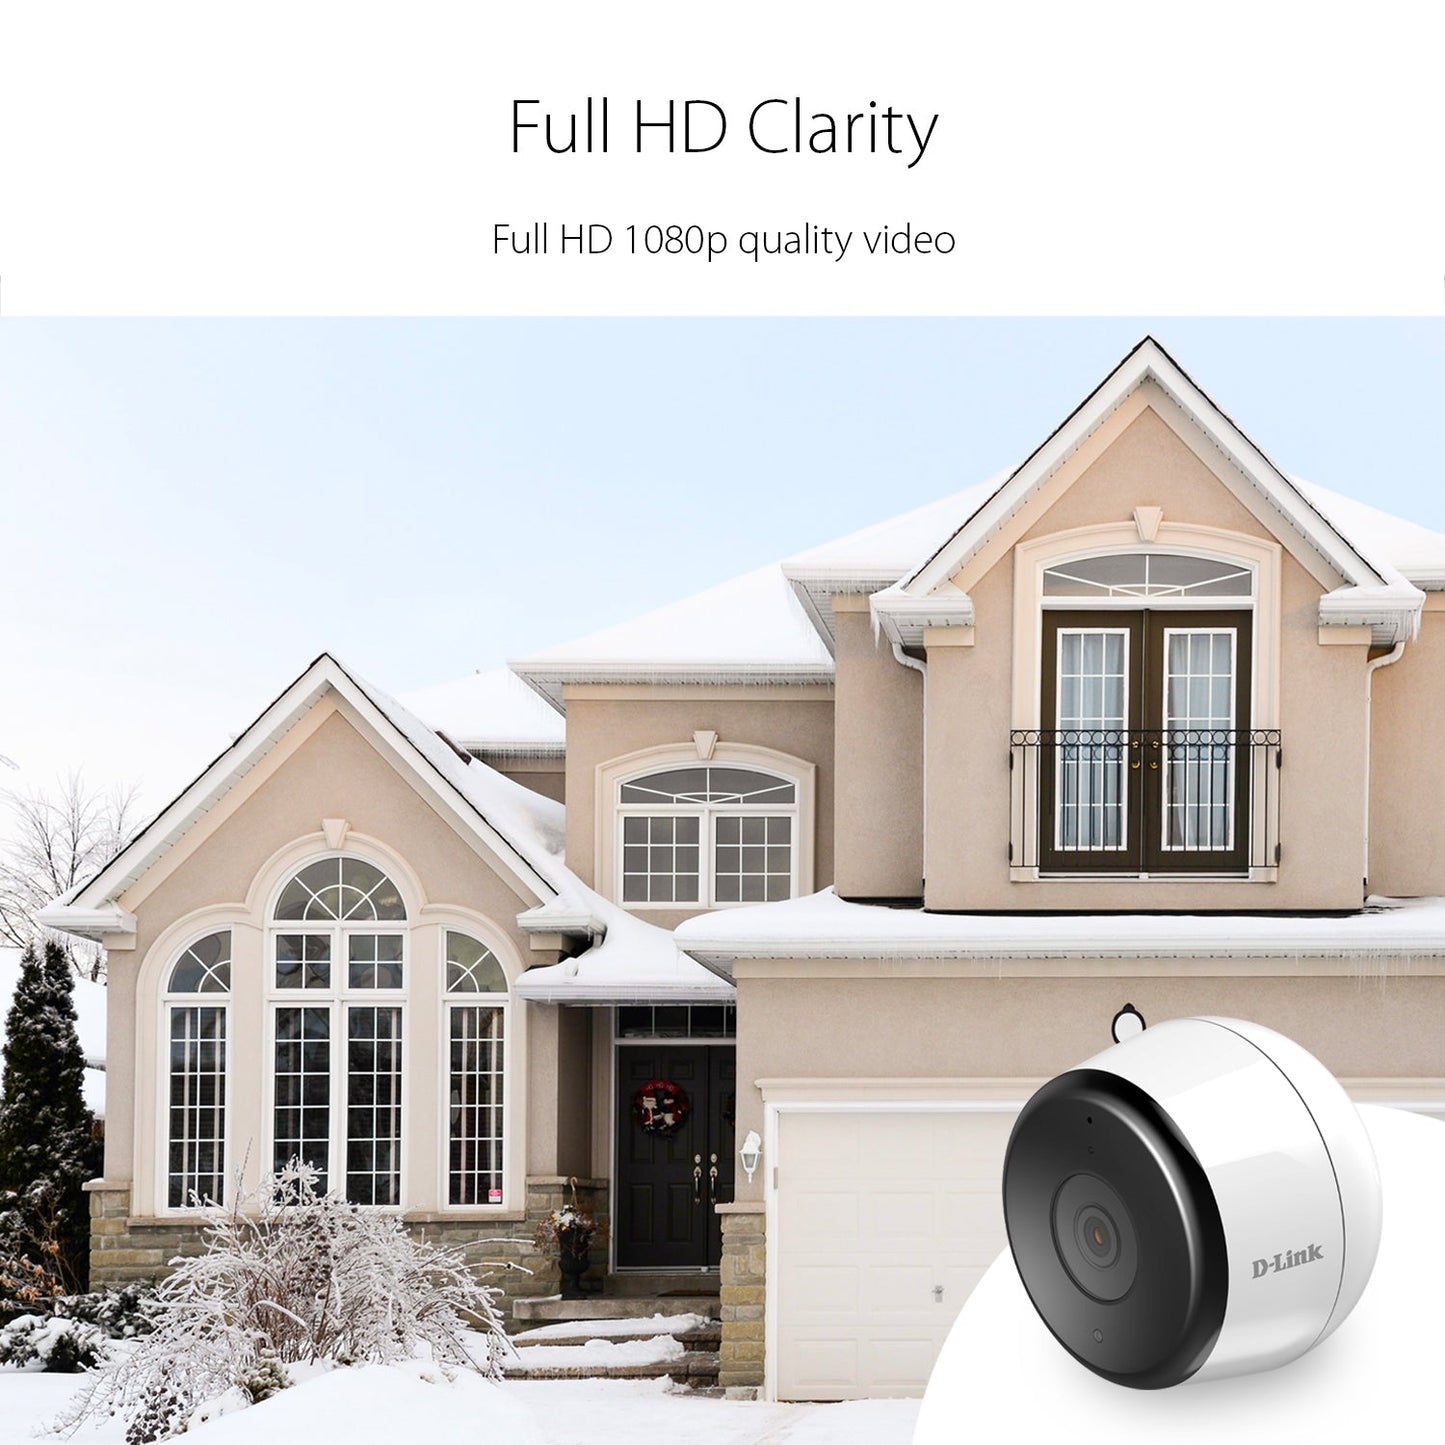 [Certified Refurbished] mydlink Full HD Outdoor Wi-Fi Camera - DCS-8600LH/RE